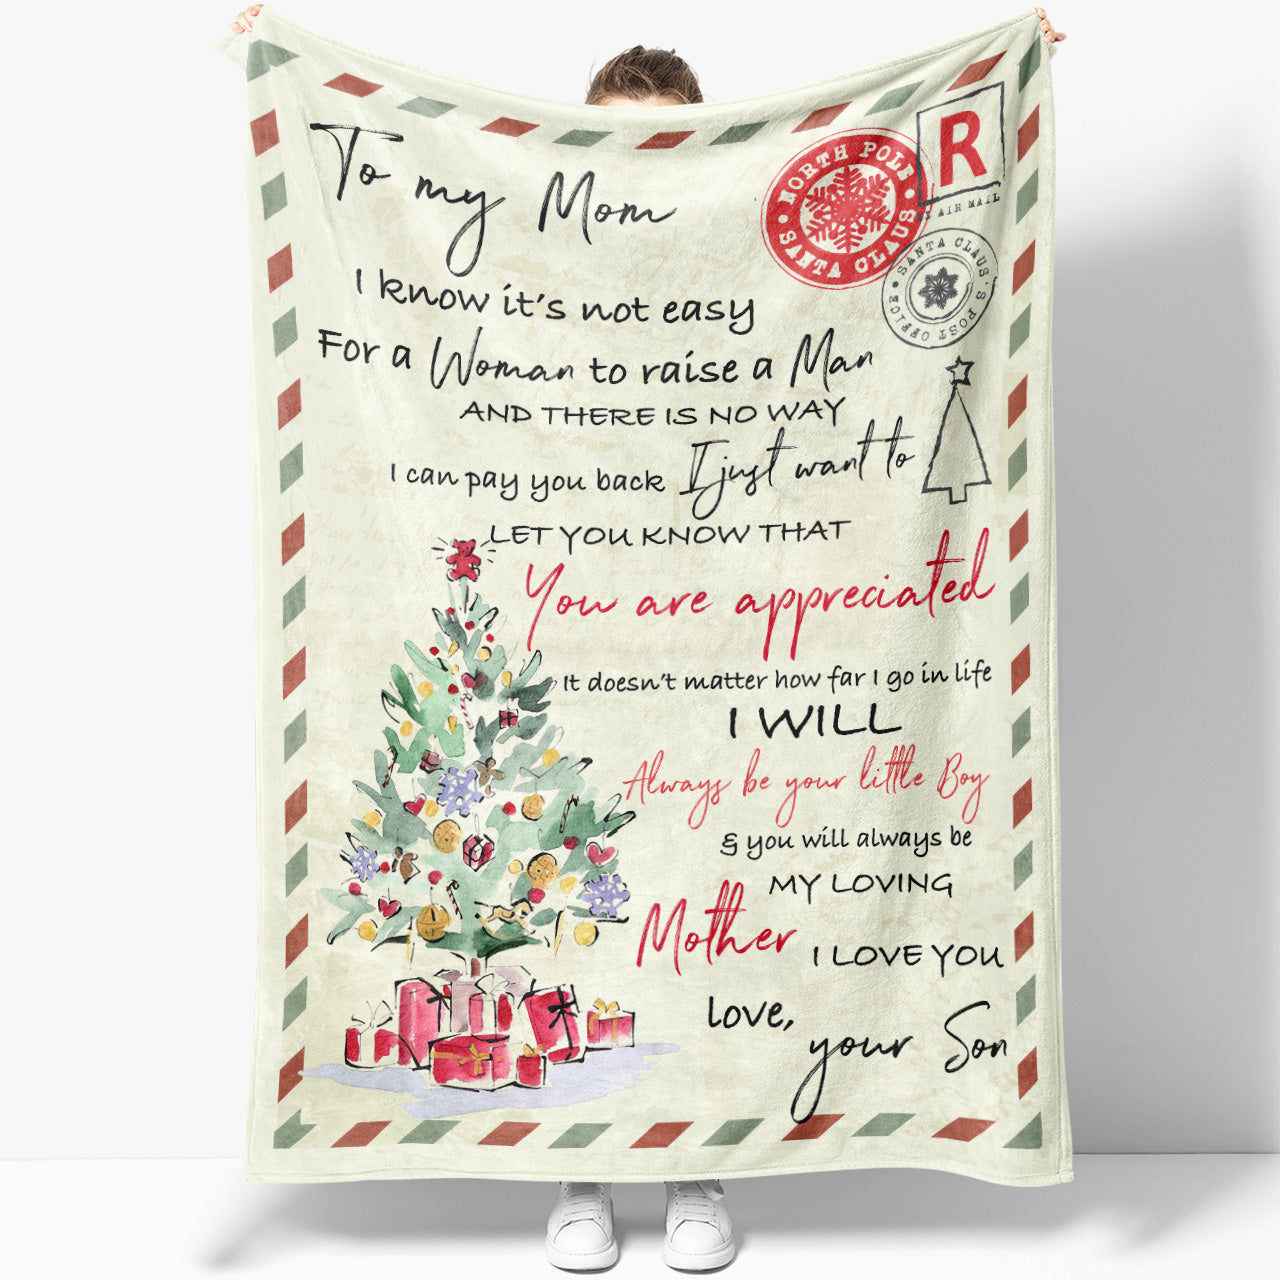 Blanket Gift ideas For Mom, Christmas Gifts For Mom, You Are, Gift For  Mother, Christmas Presents For Moms, Awesome Mothers Day Gifts Ideas -  Sweet Family Gift